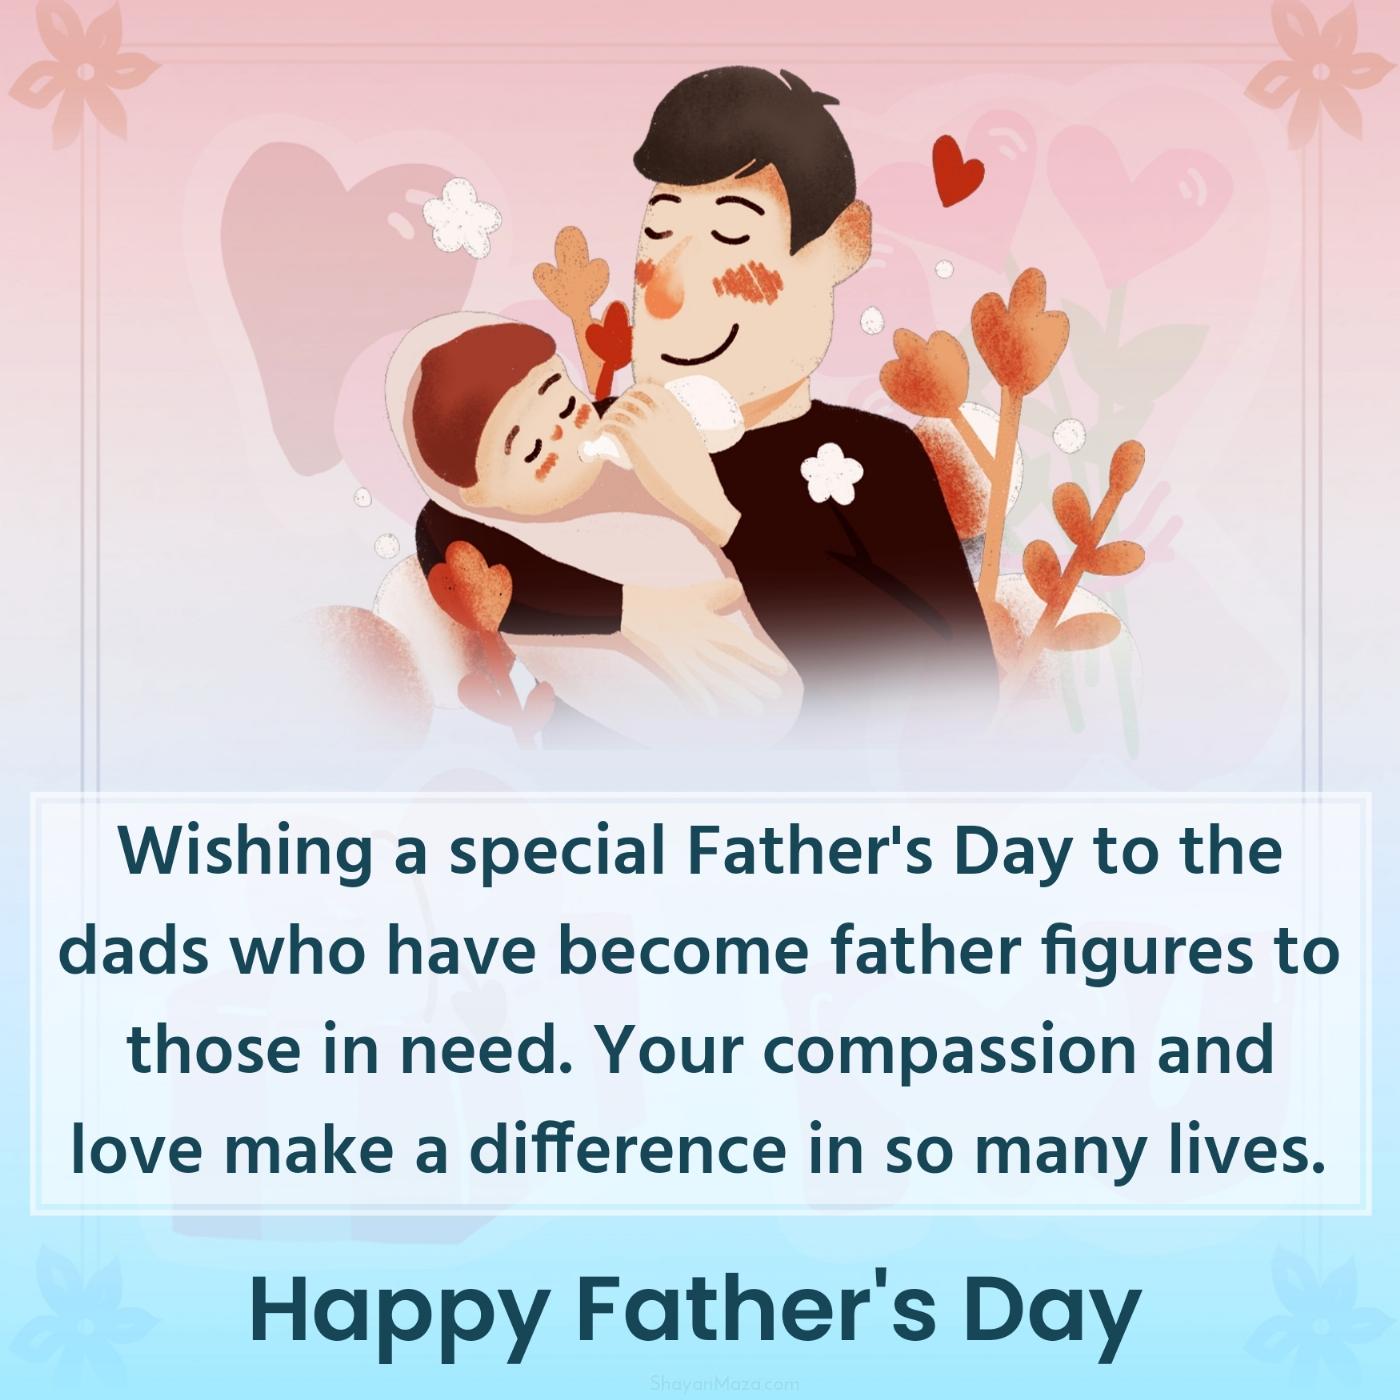 Wishing a special Father's Day to the dads who have become father